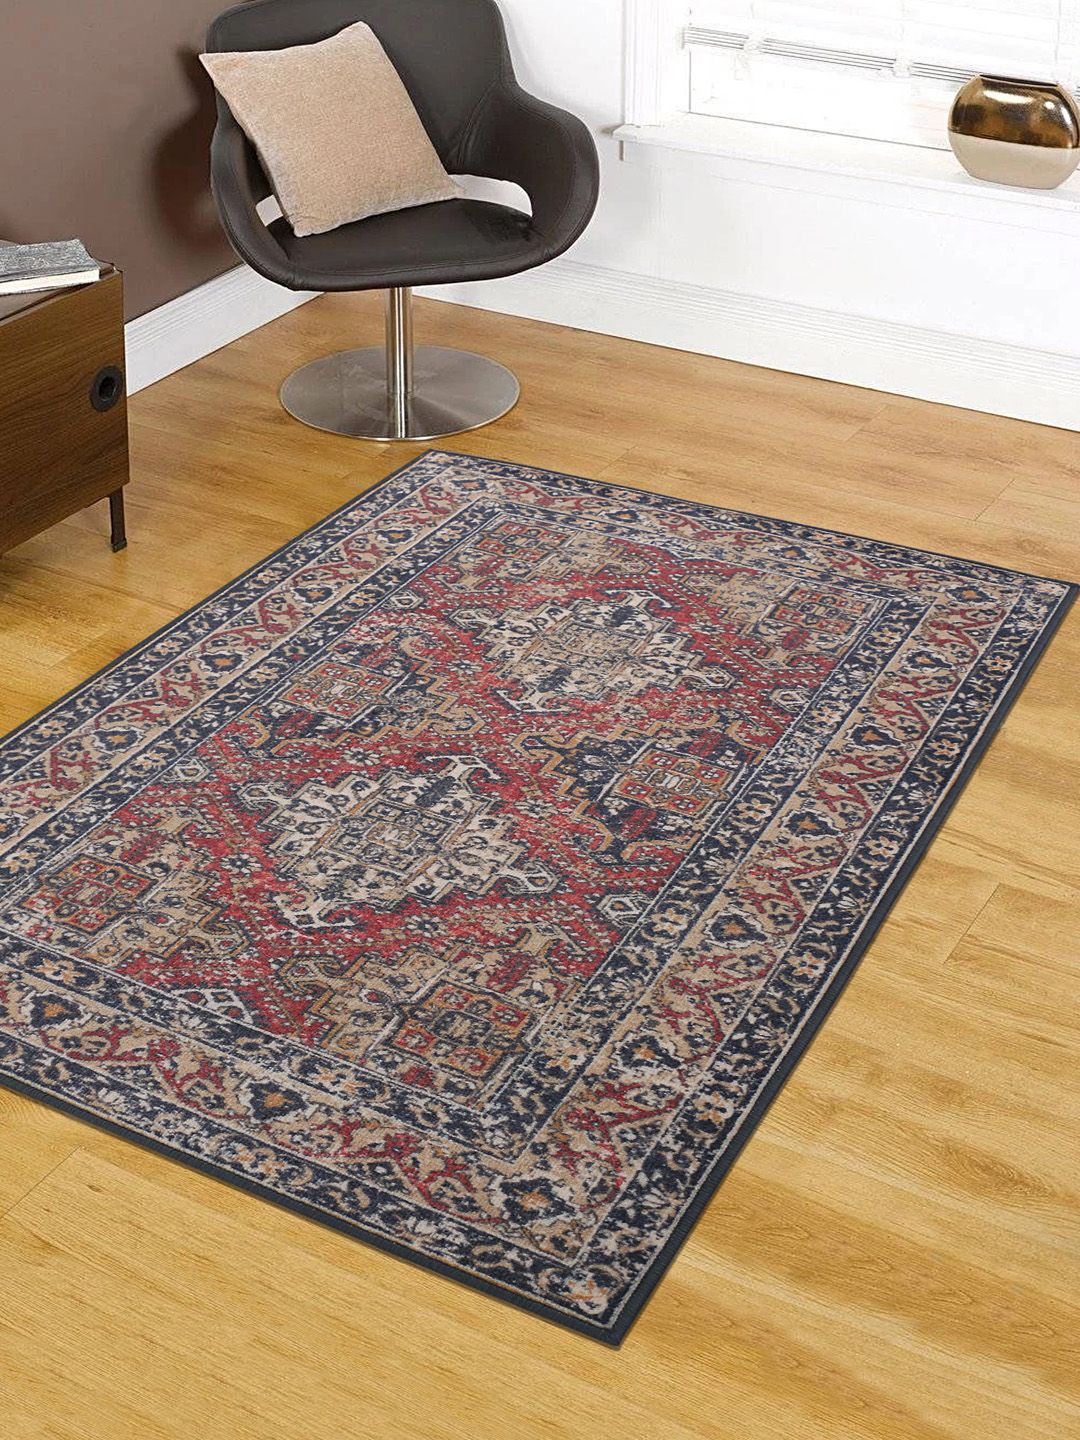 RUGSMITH Red & Black Patterned Anti-Skid Carpet Price in India